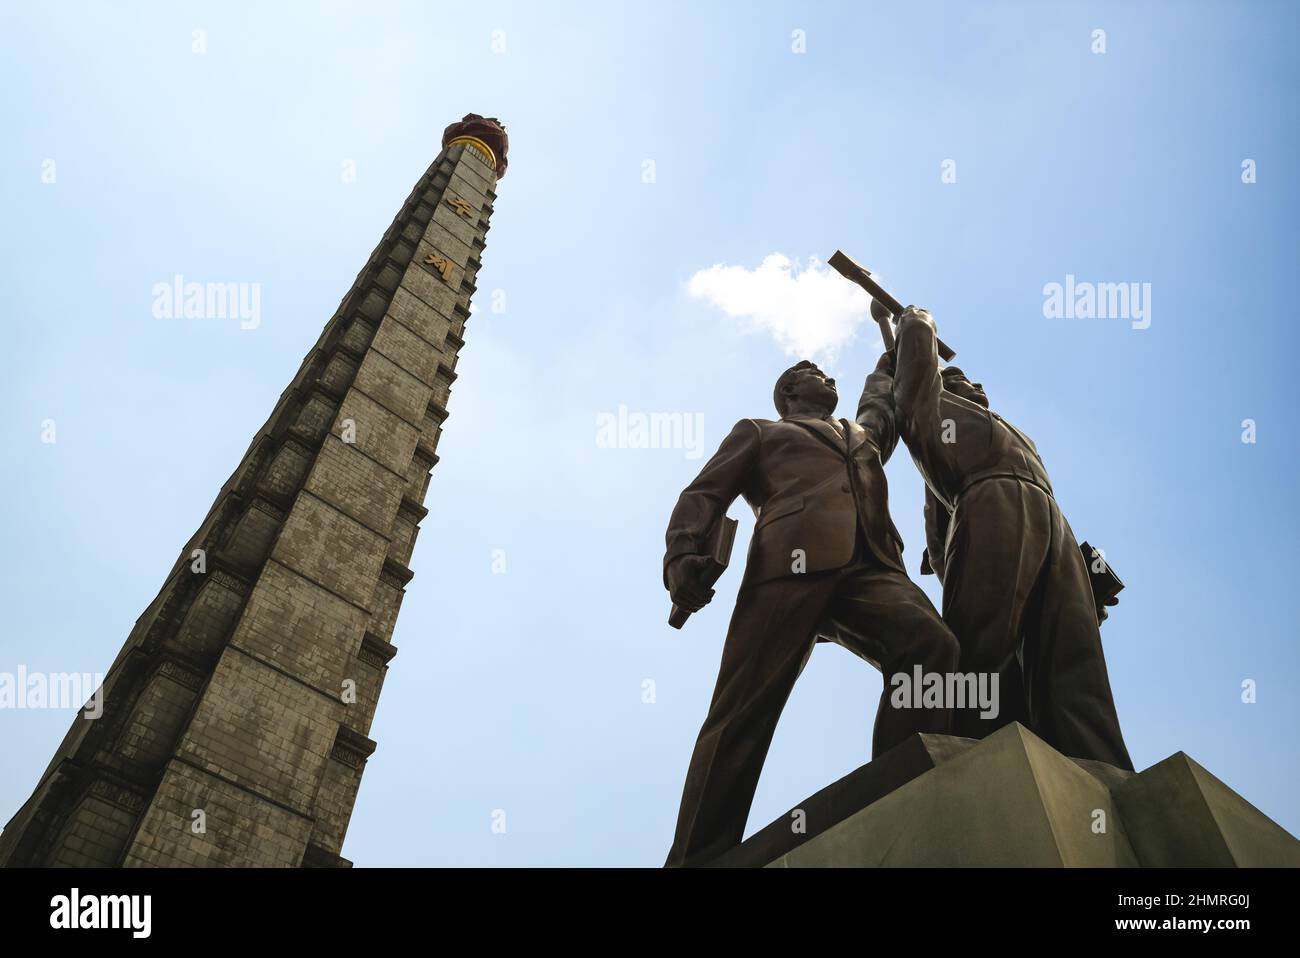 April 29, 2019: Up close view of the Juche Tower and the accompanying monument to the Workers Party of Korea located in Pyongyang, the capital of Nort Stock Photo